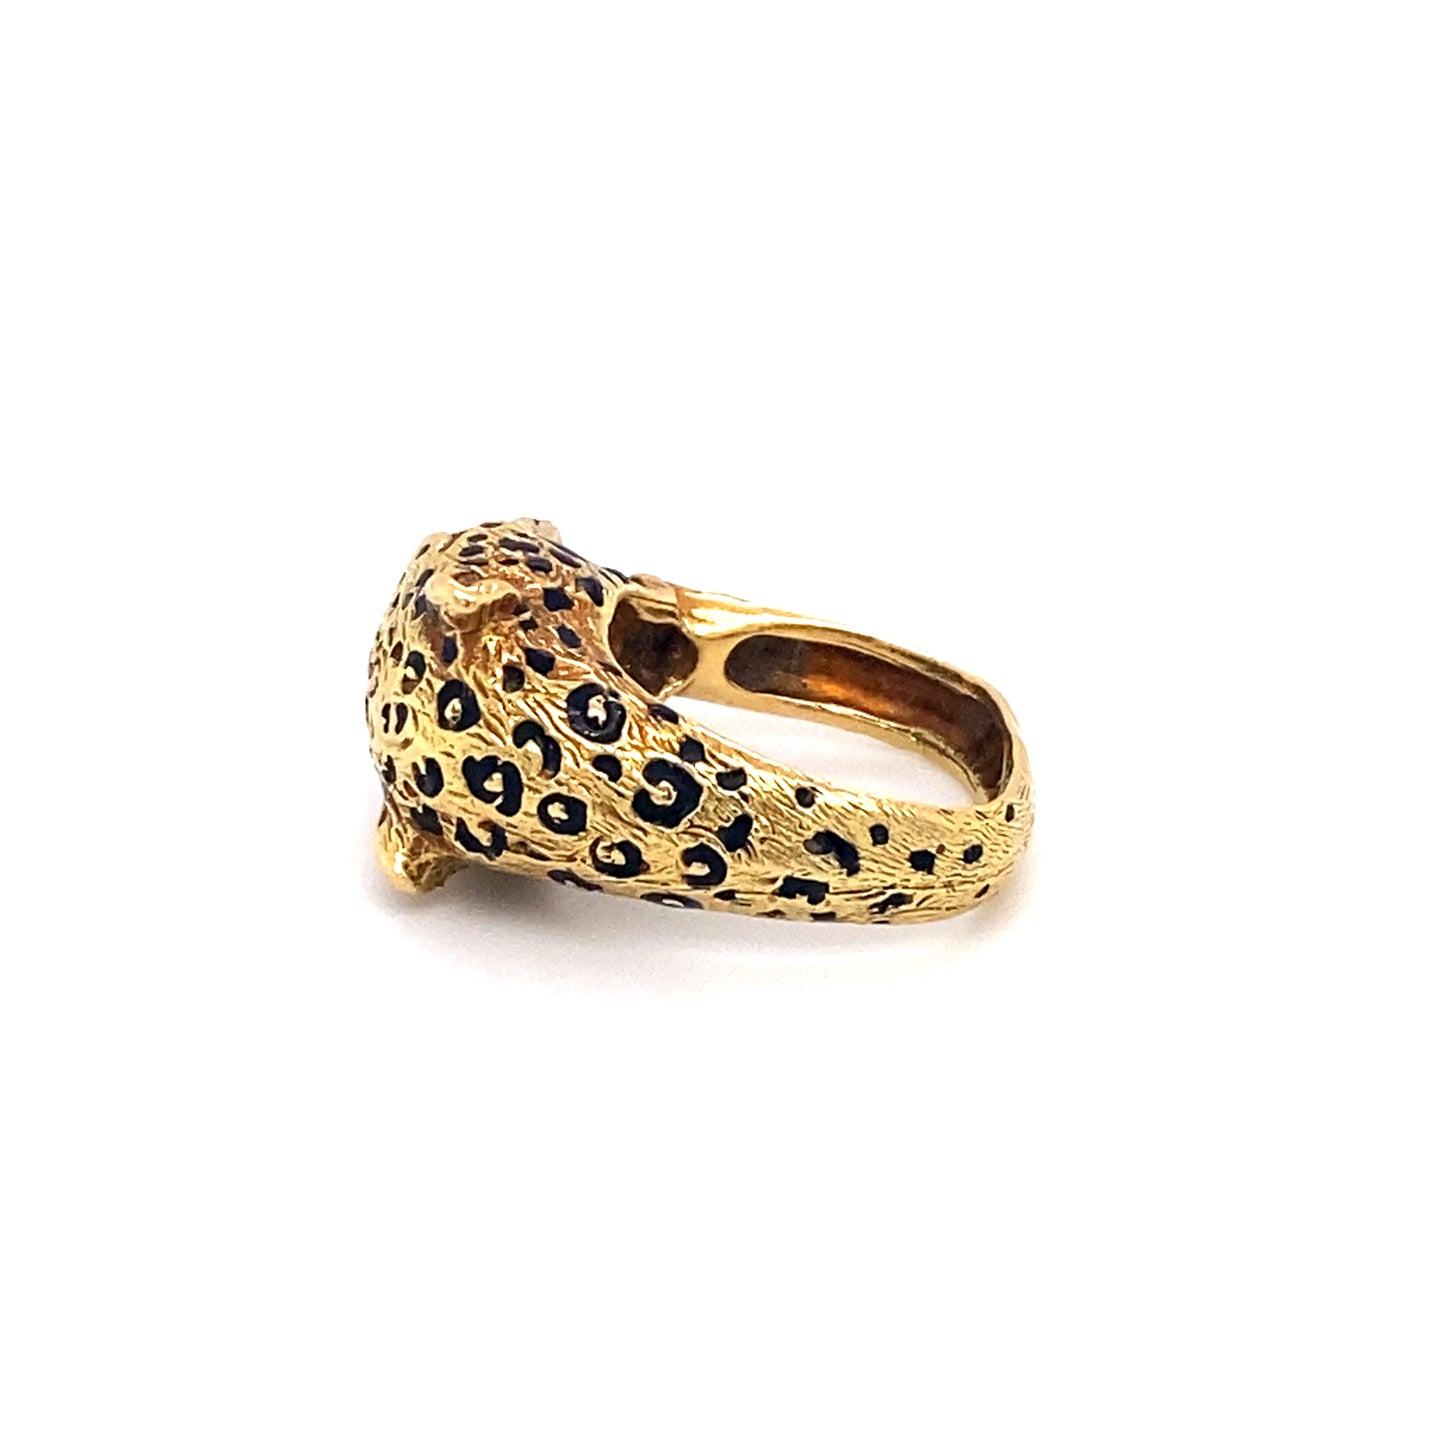 Vintage French 18K Gold Leopard Ring with Ruby Eyes